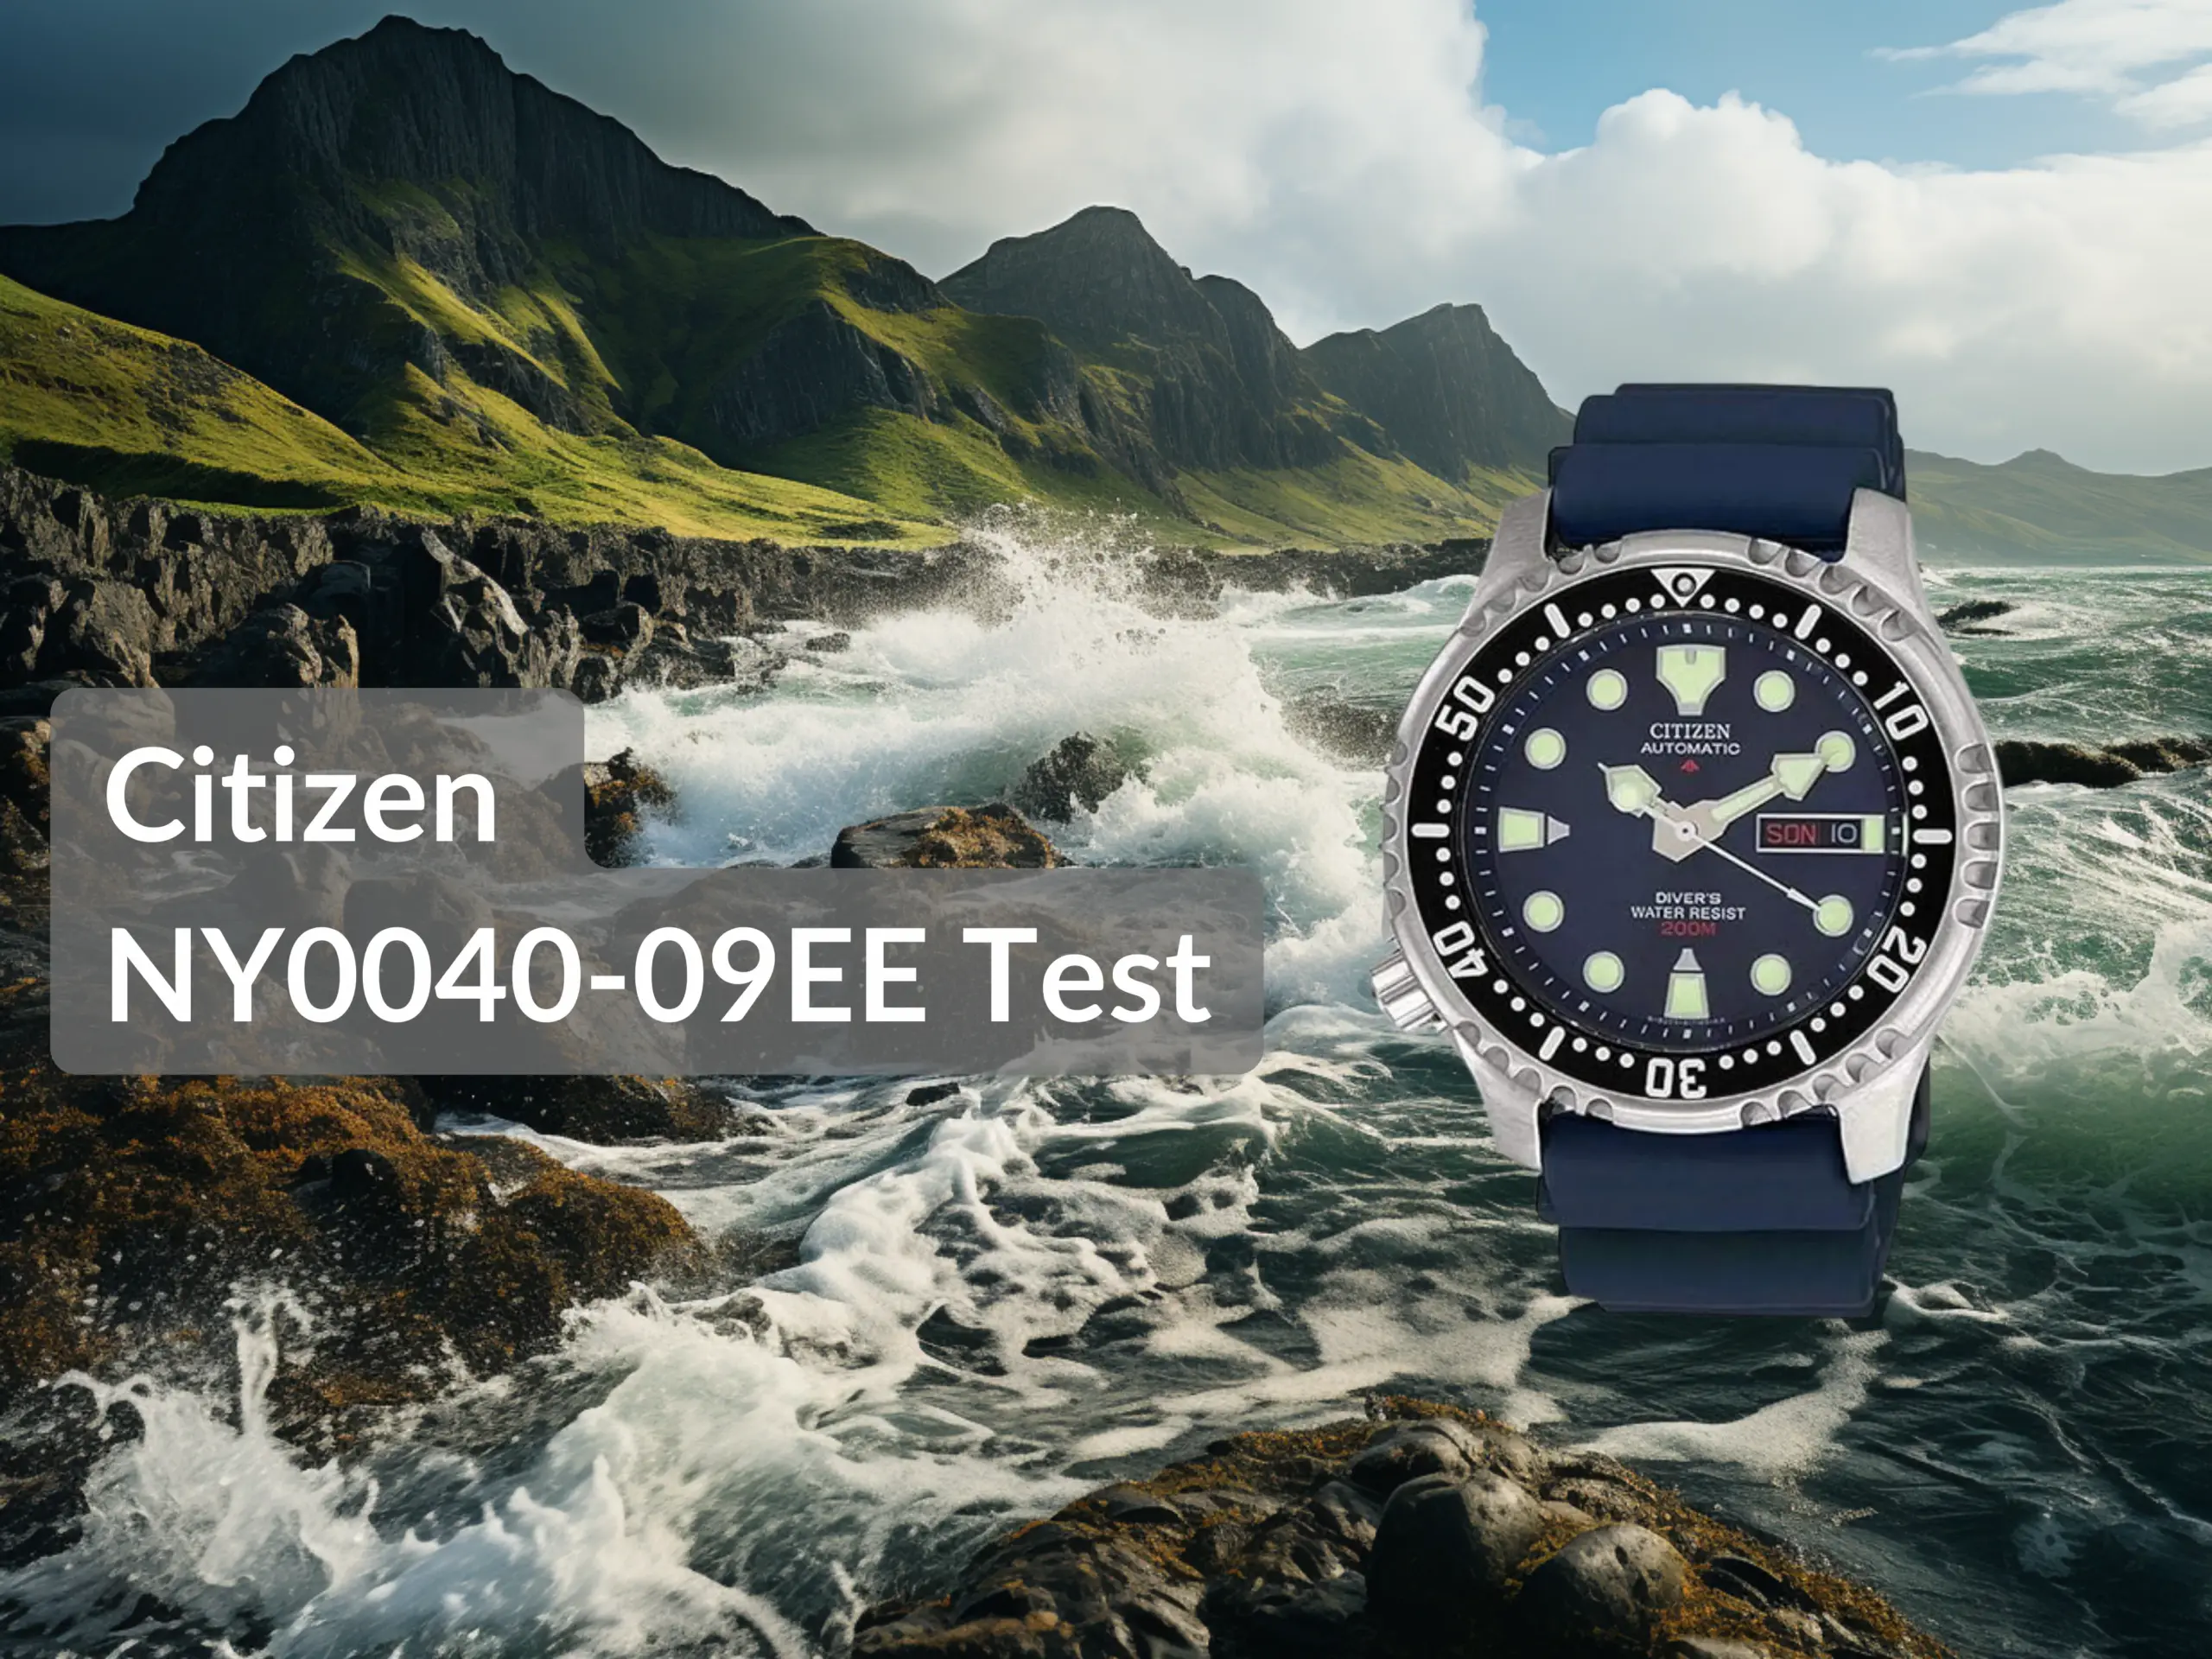 Citizen NY0040 09EE Test